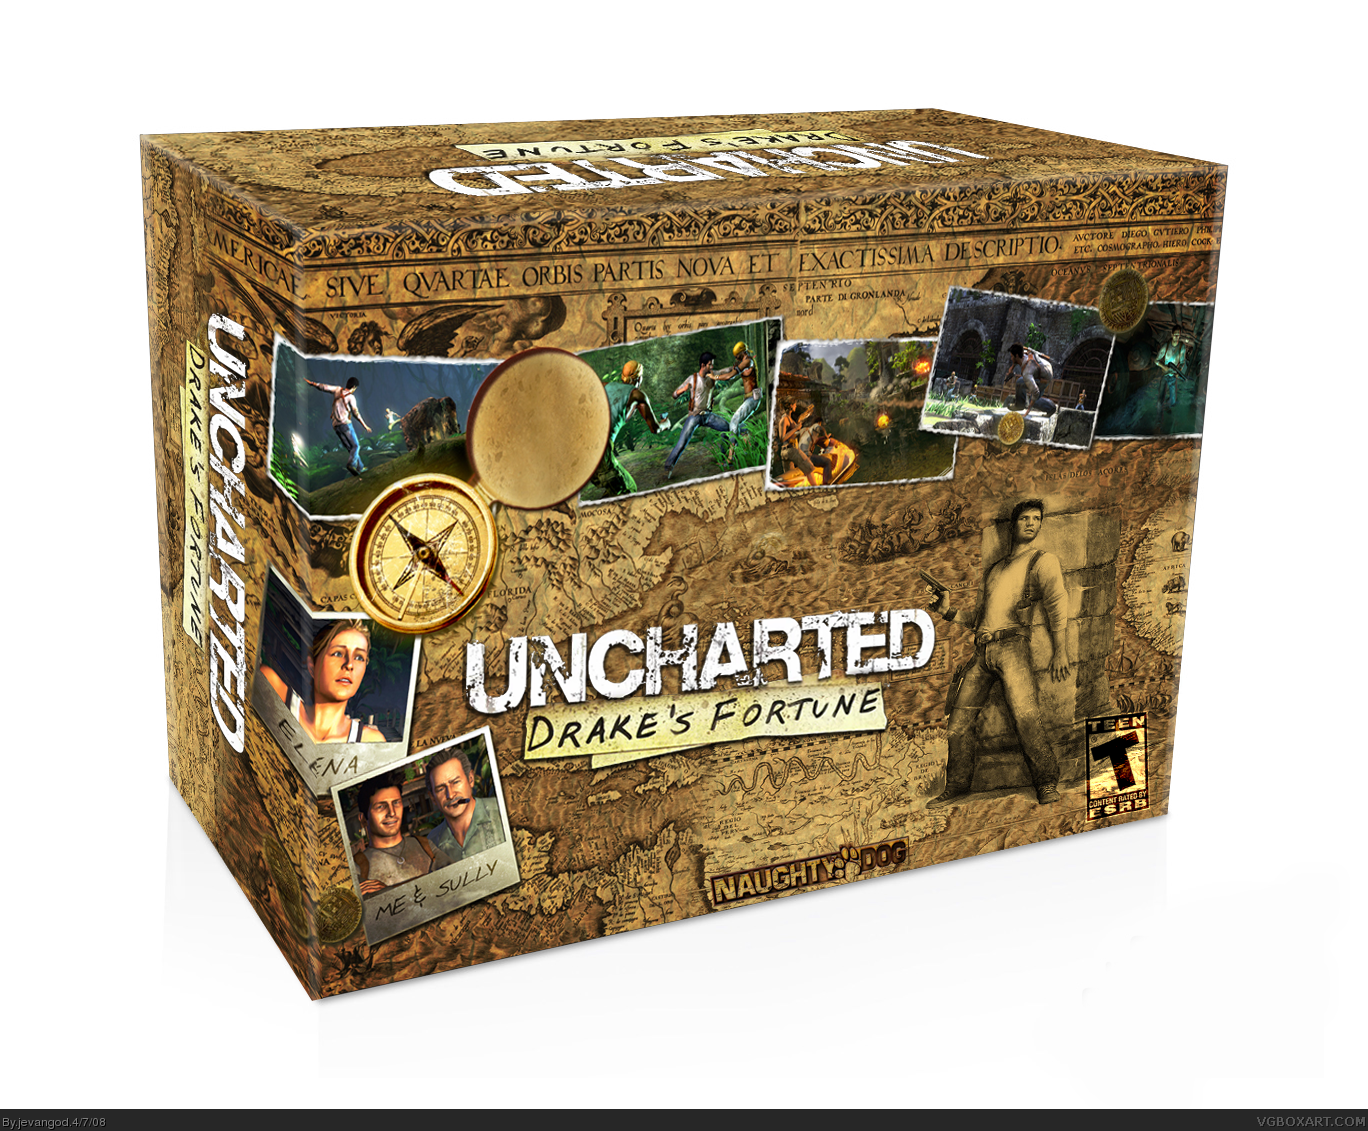 Uncharted: Drake's Fortune box cover